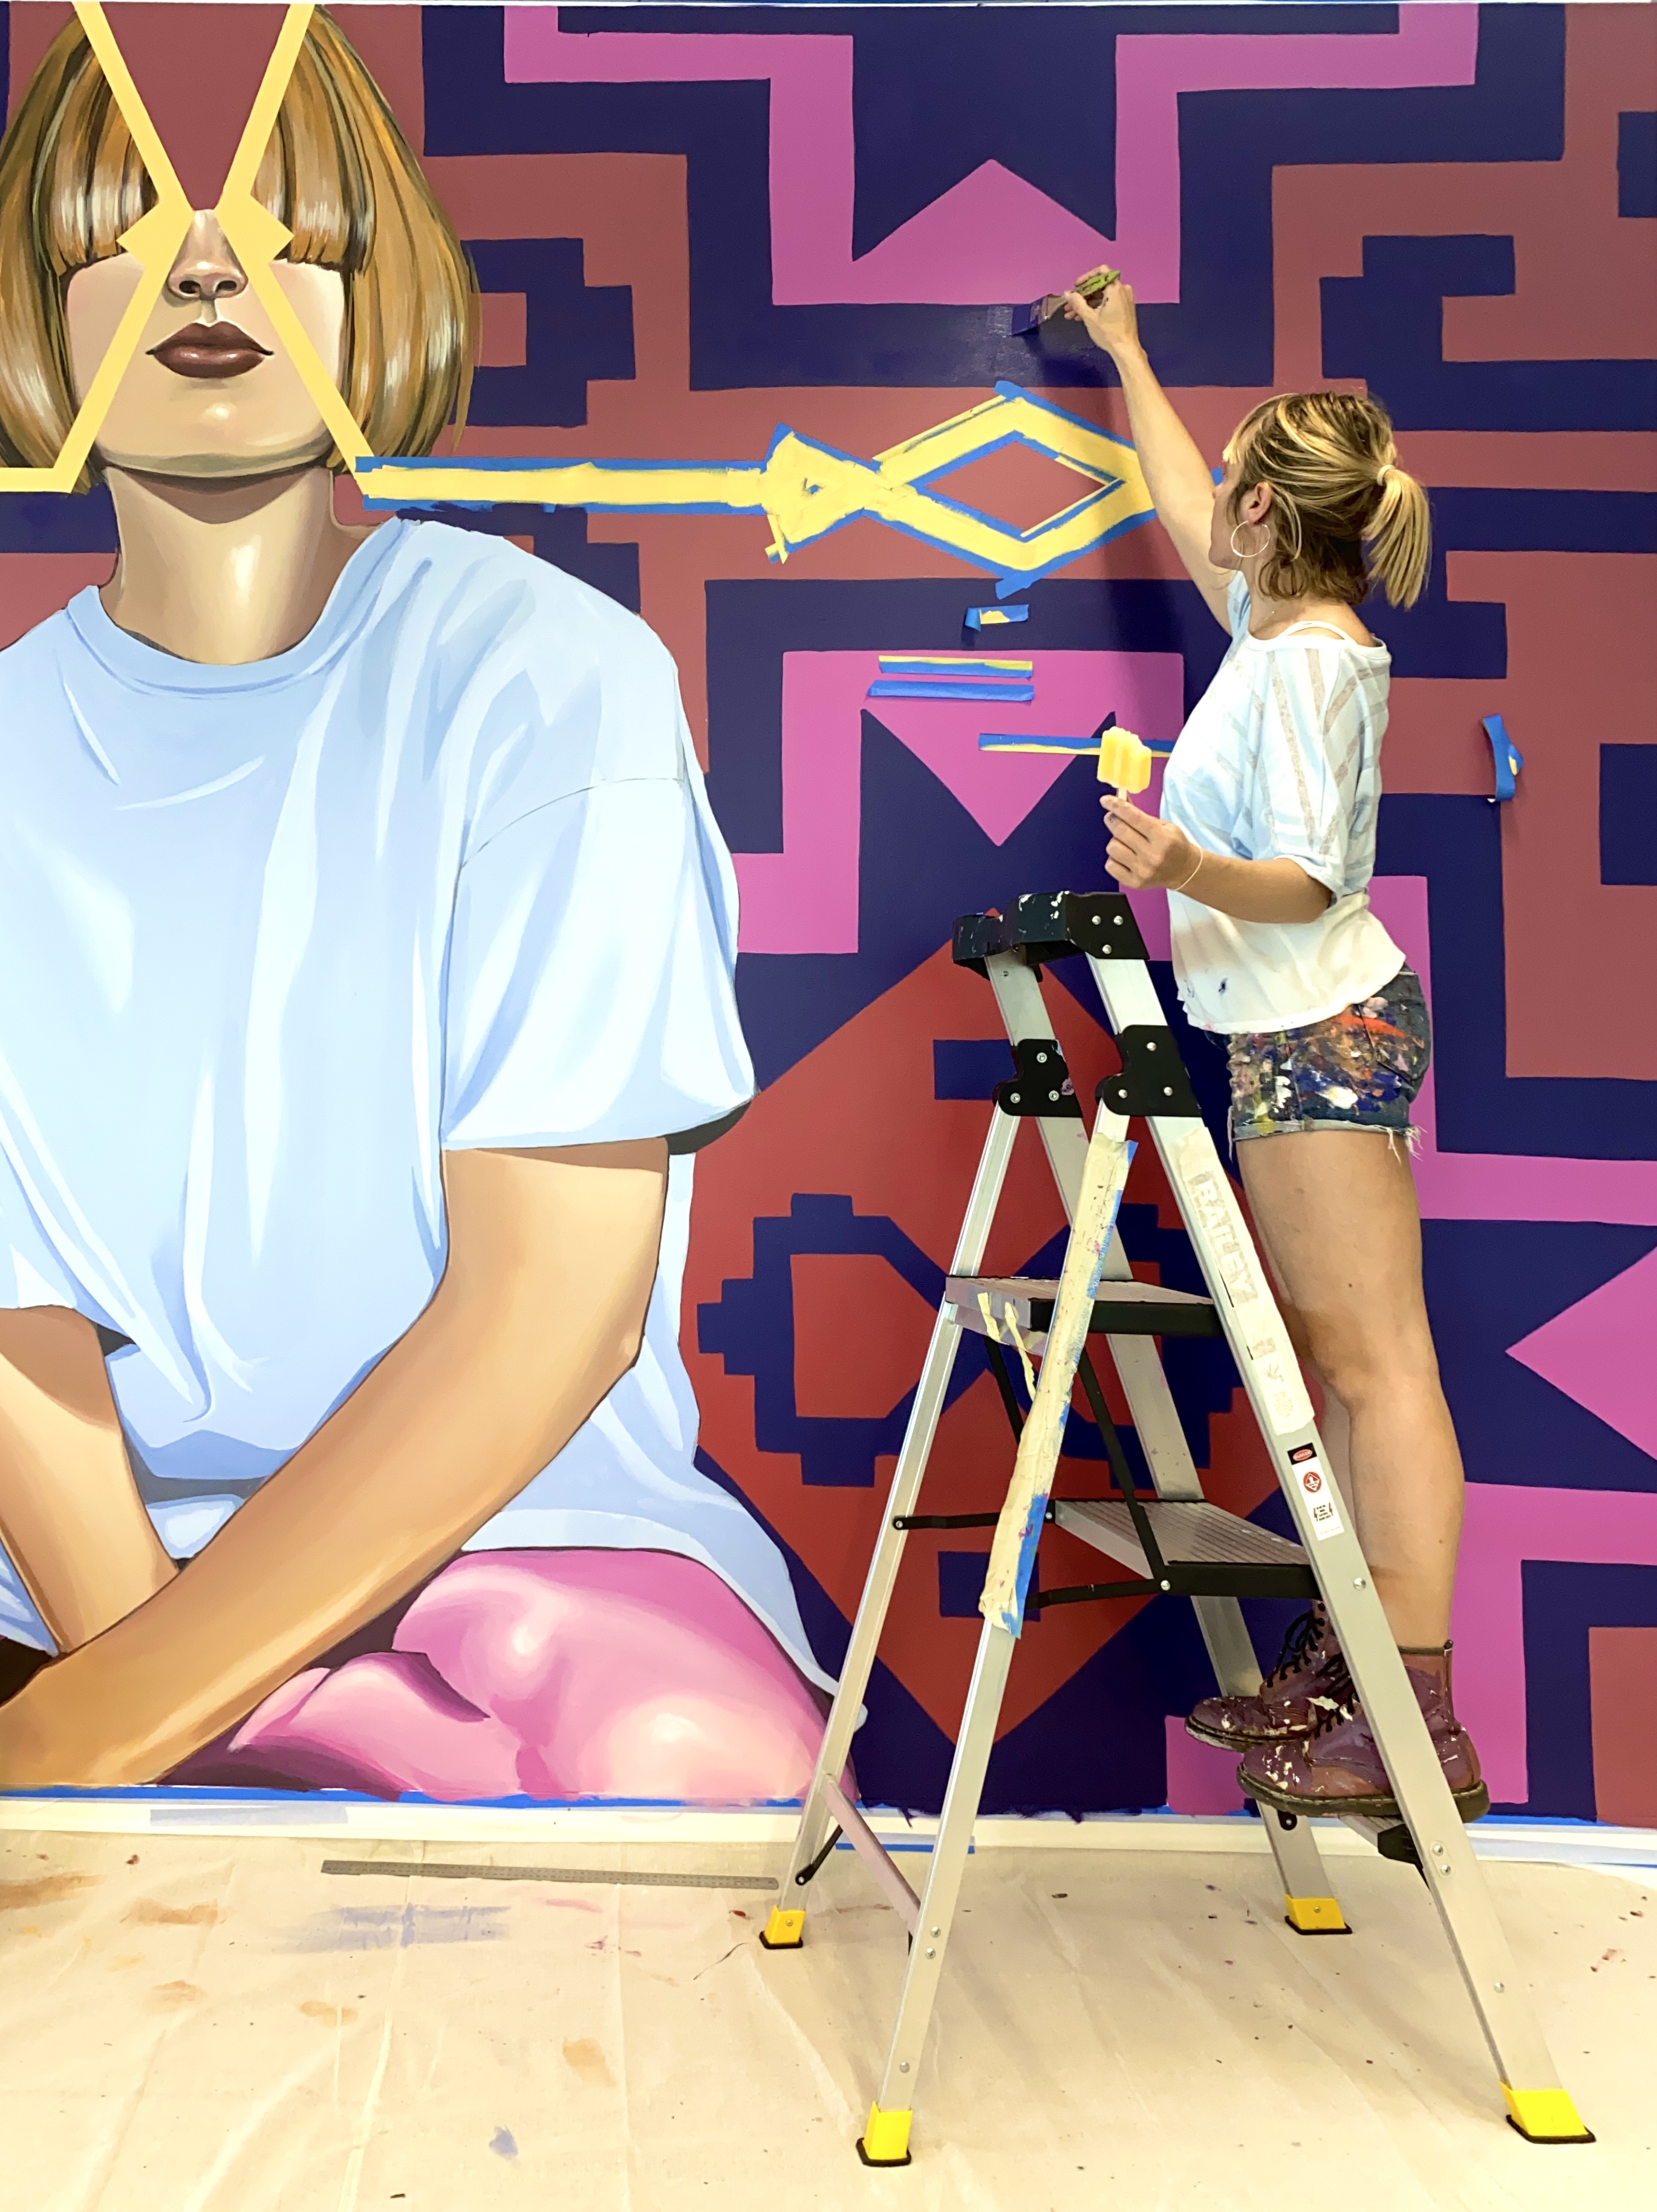 Image of artist Lucy Lucy painting a mural.